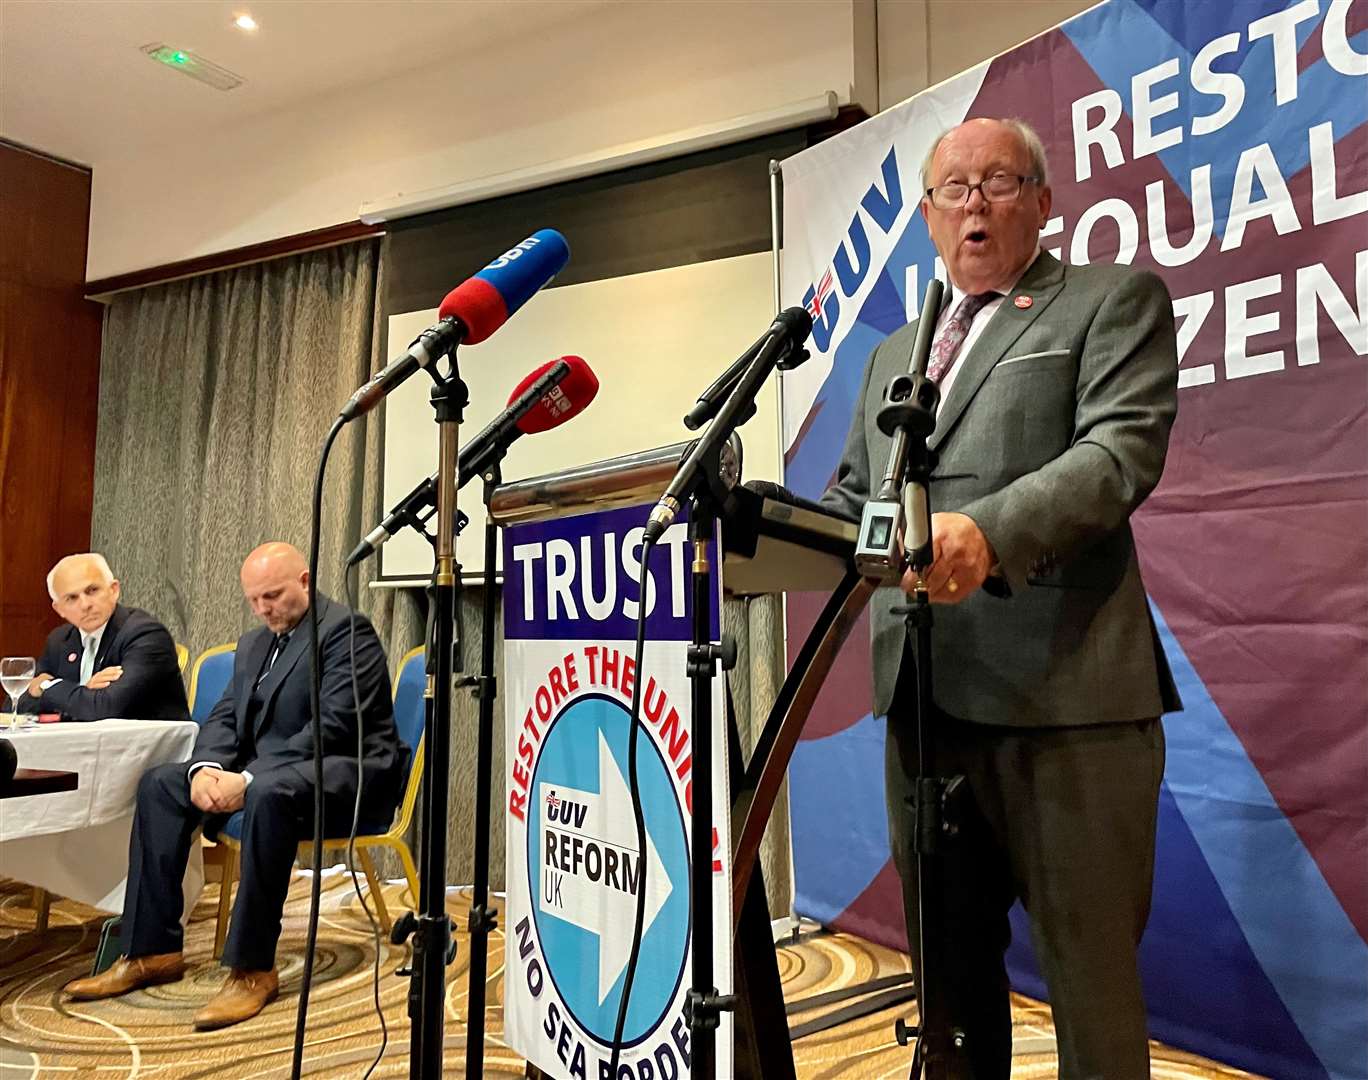 TUV leader Jim Allister speaking at his party’s manifesto launch (David Young/PA)